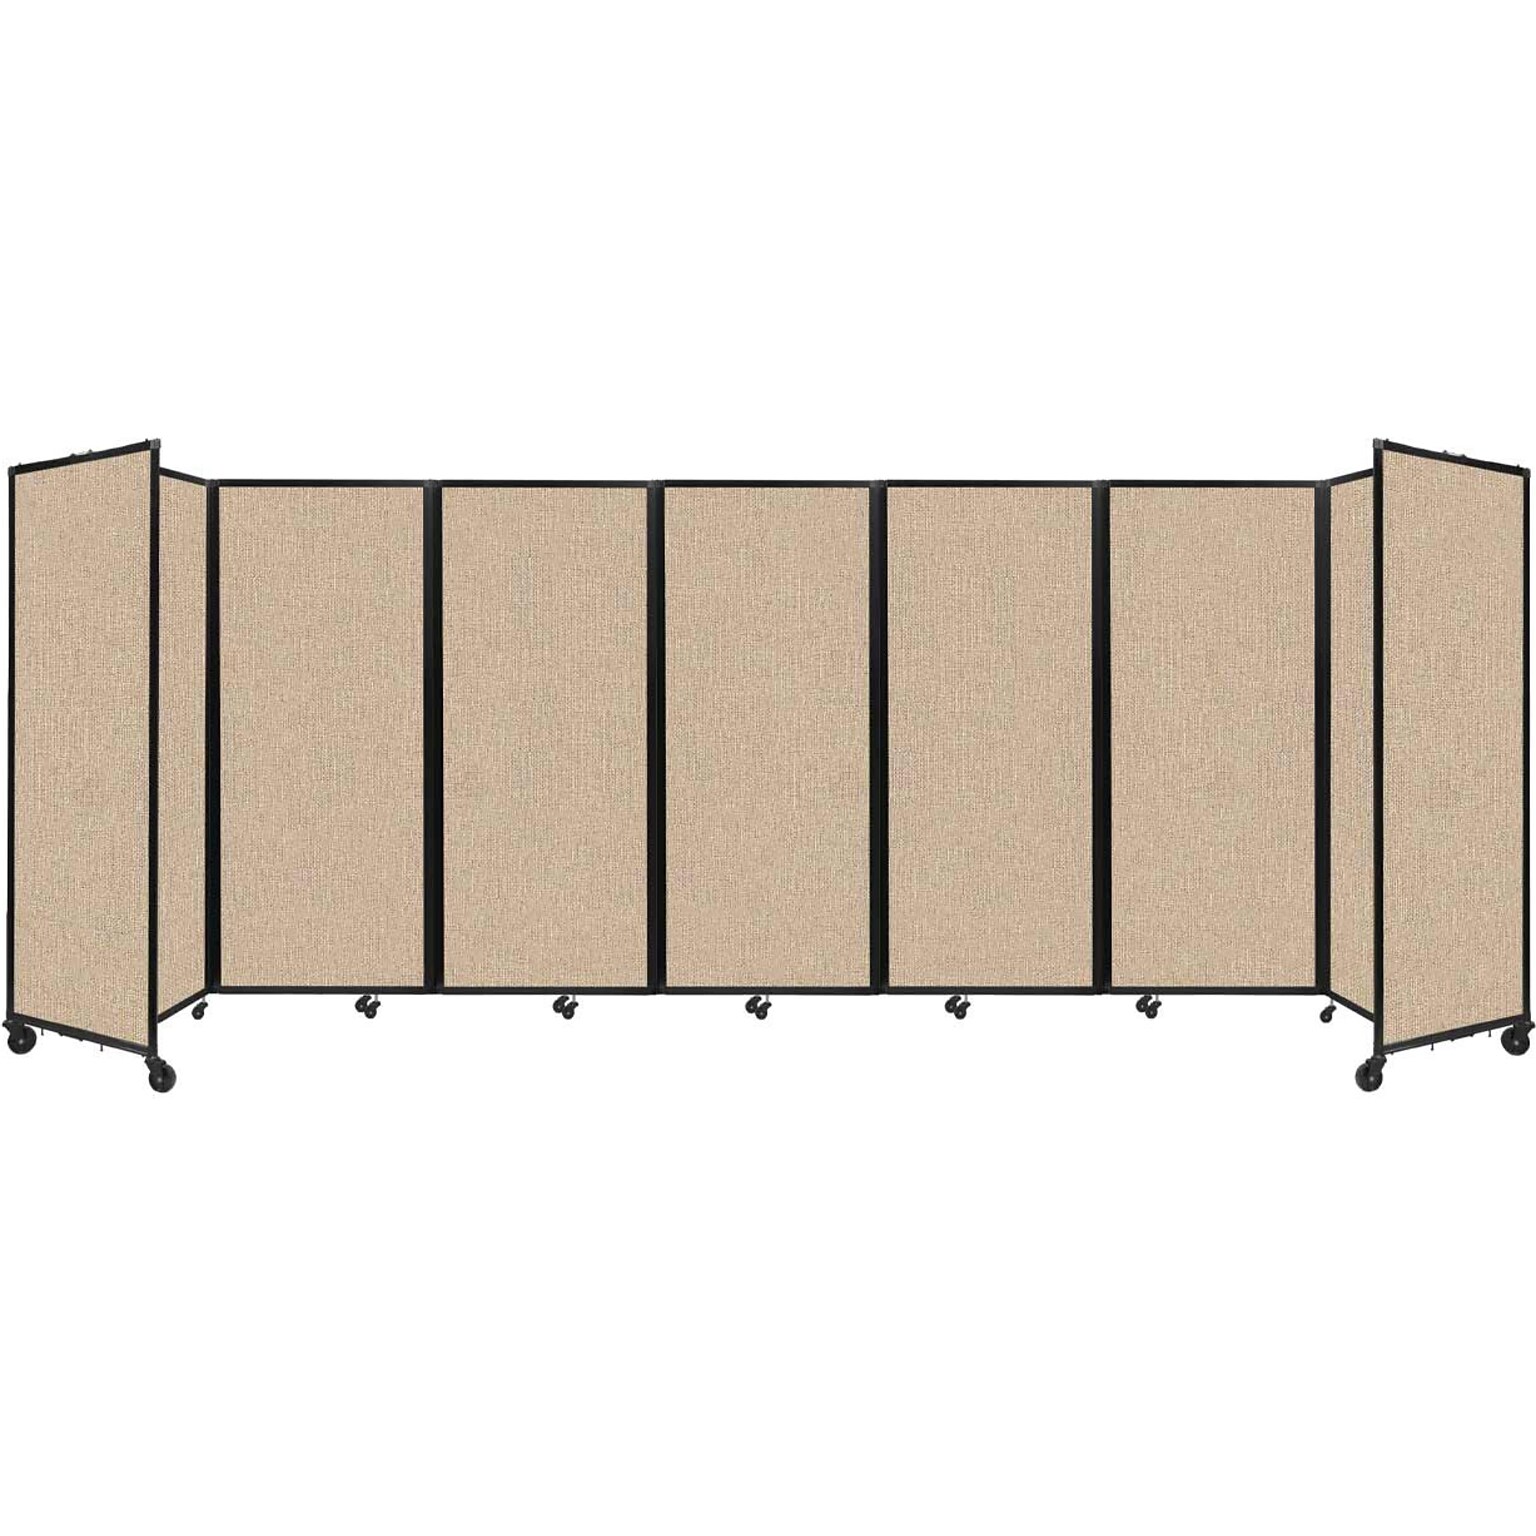 Versare The Room Divider 360 Freestanding Folding Portable Partition, 82H x 234W, Beige Fabric (1182701)